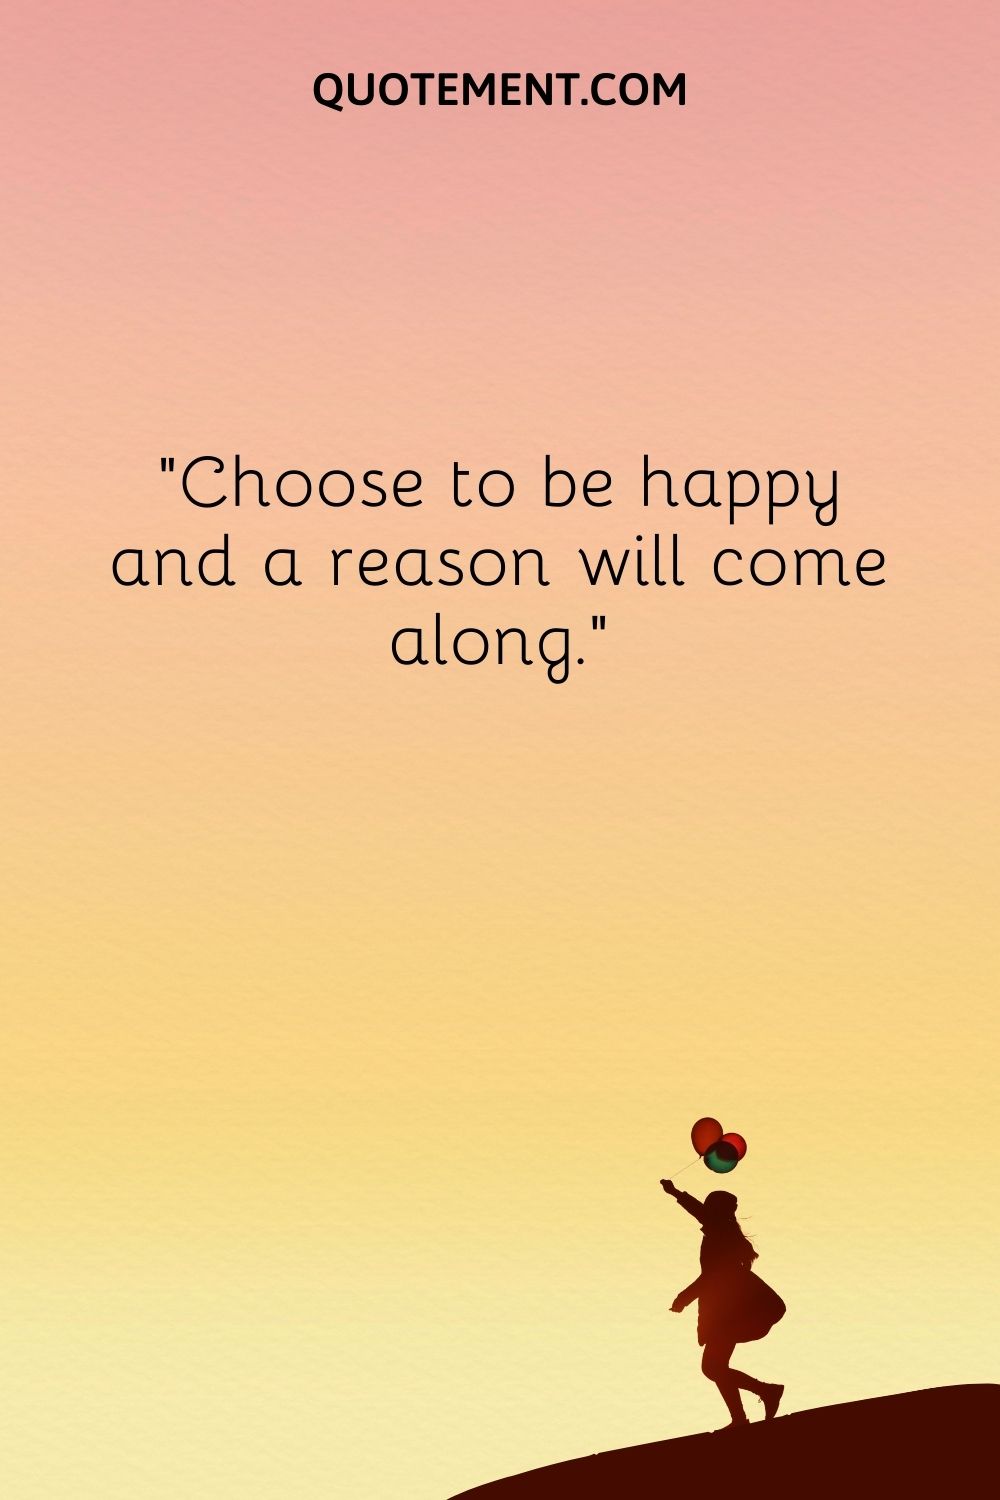 Choose to be happy and a reason will come along